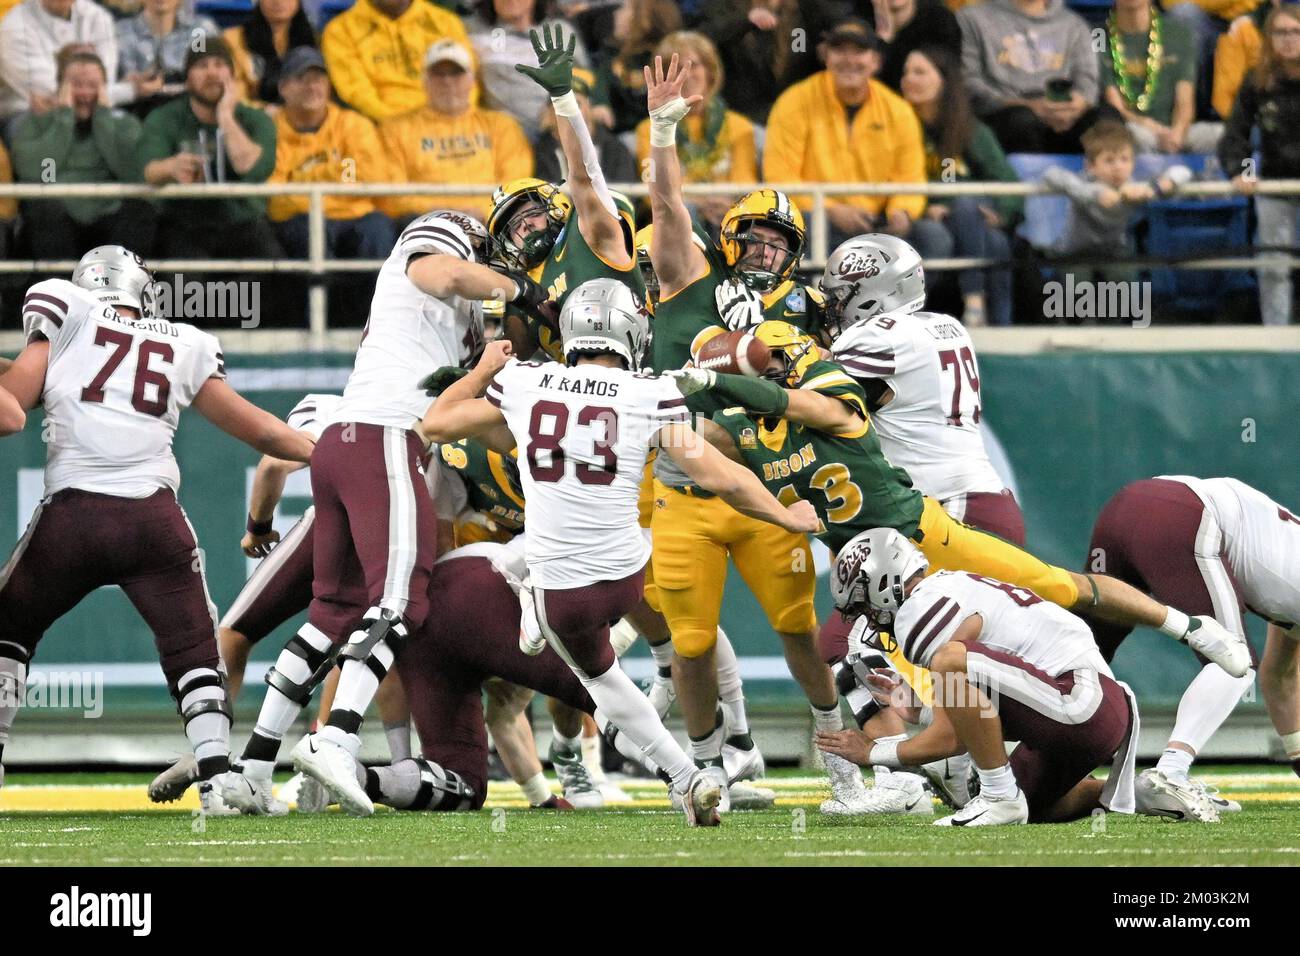 North Dakota State Bison cornerback Anthony Coleman (13) blocks an extra kick near the end of a NCAA FCS second round playoff game between the University of Montana Grizzlies and the North Dakota State Bison at the Fargo Dome, Fargo, ND on Saturday, December 3, 2022. NDSU defeated Montana 49-26. Russell Hons/CSM Stock Photo